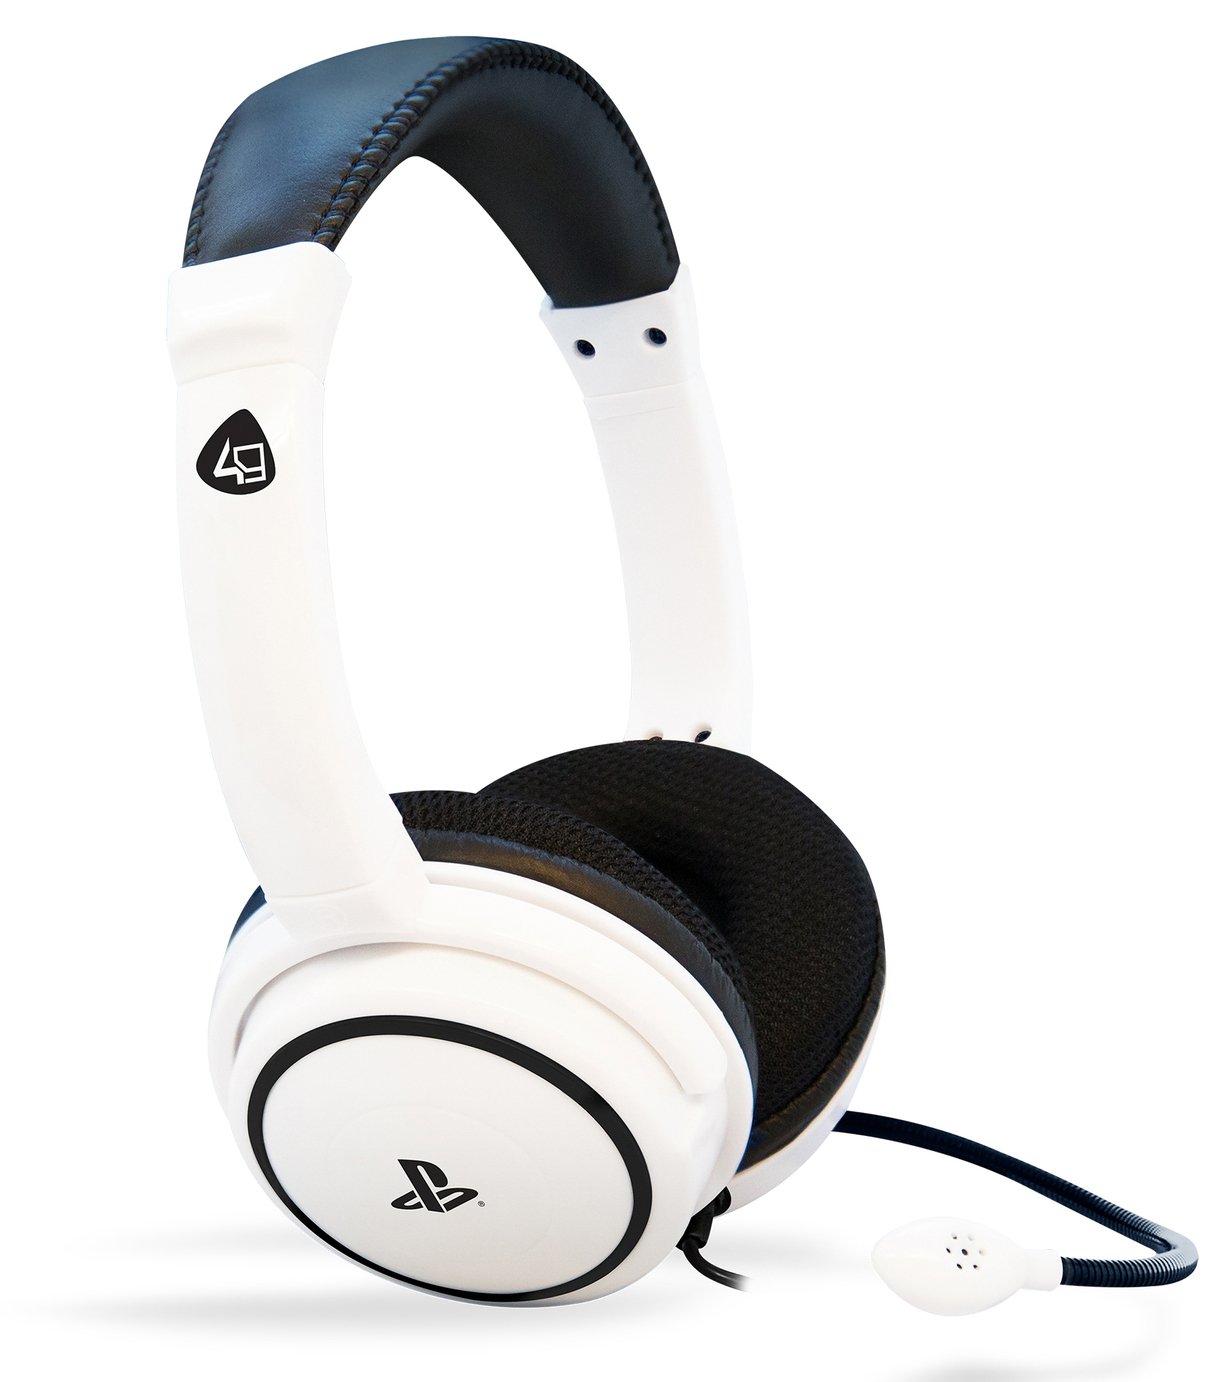 4Gamers PRO4-40 PS4 Headset - White